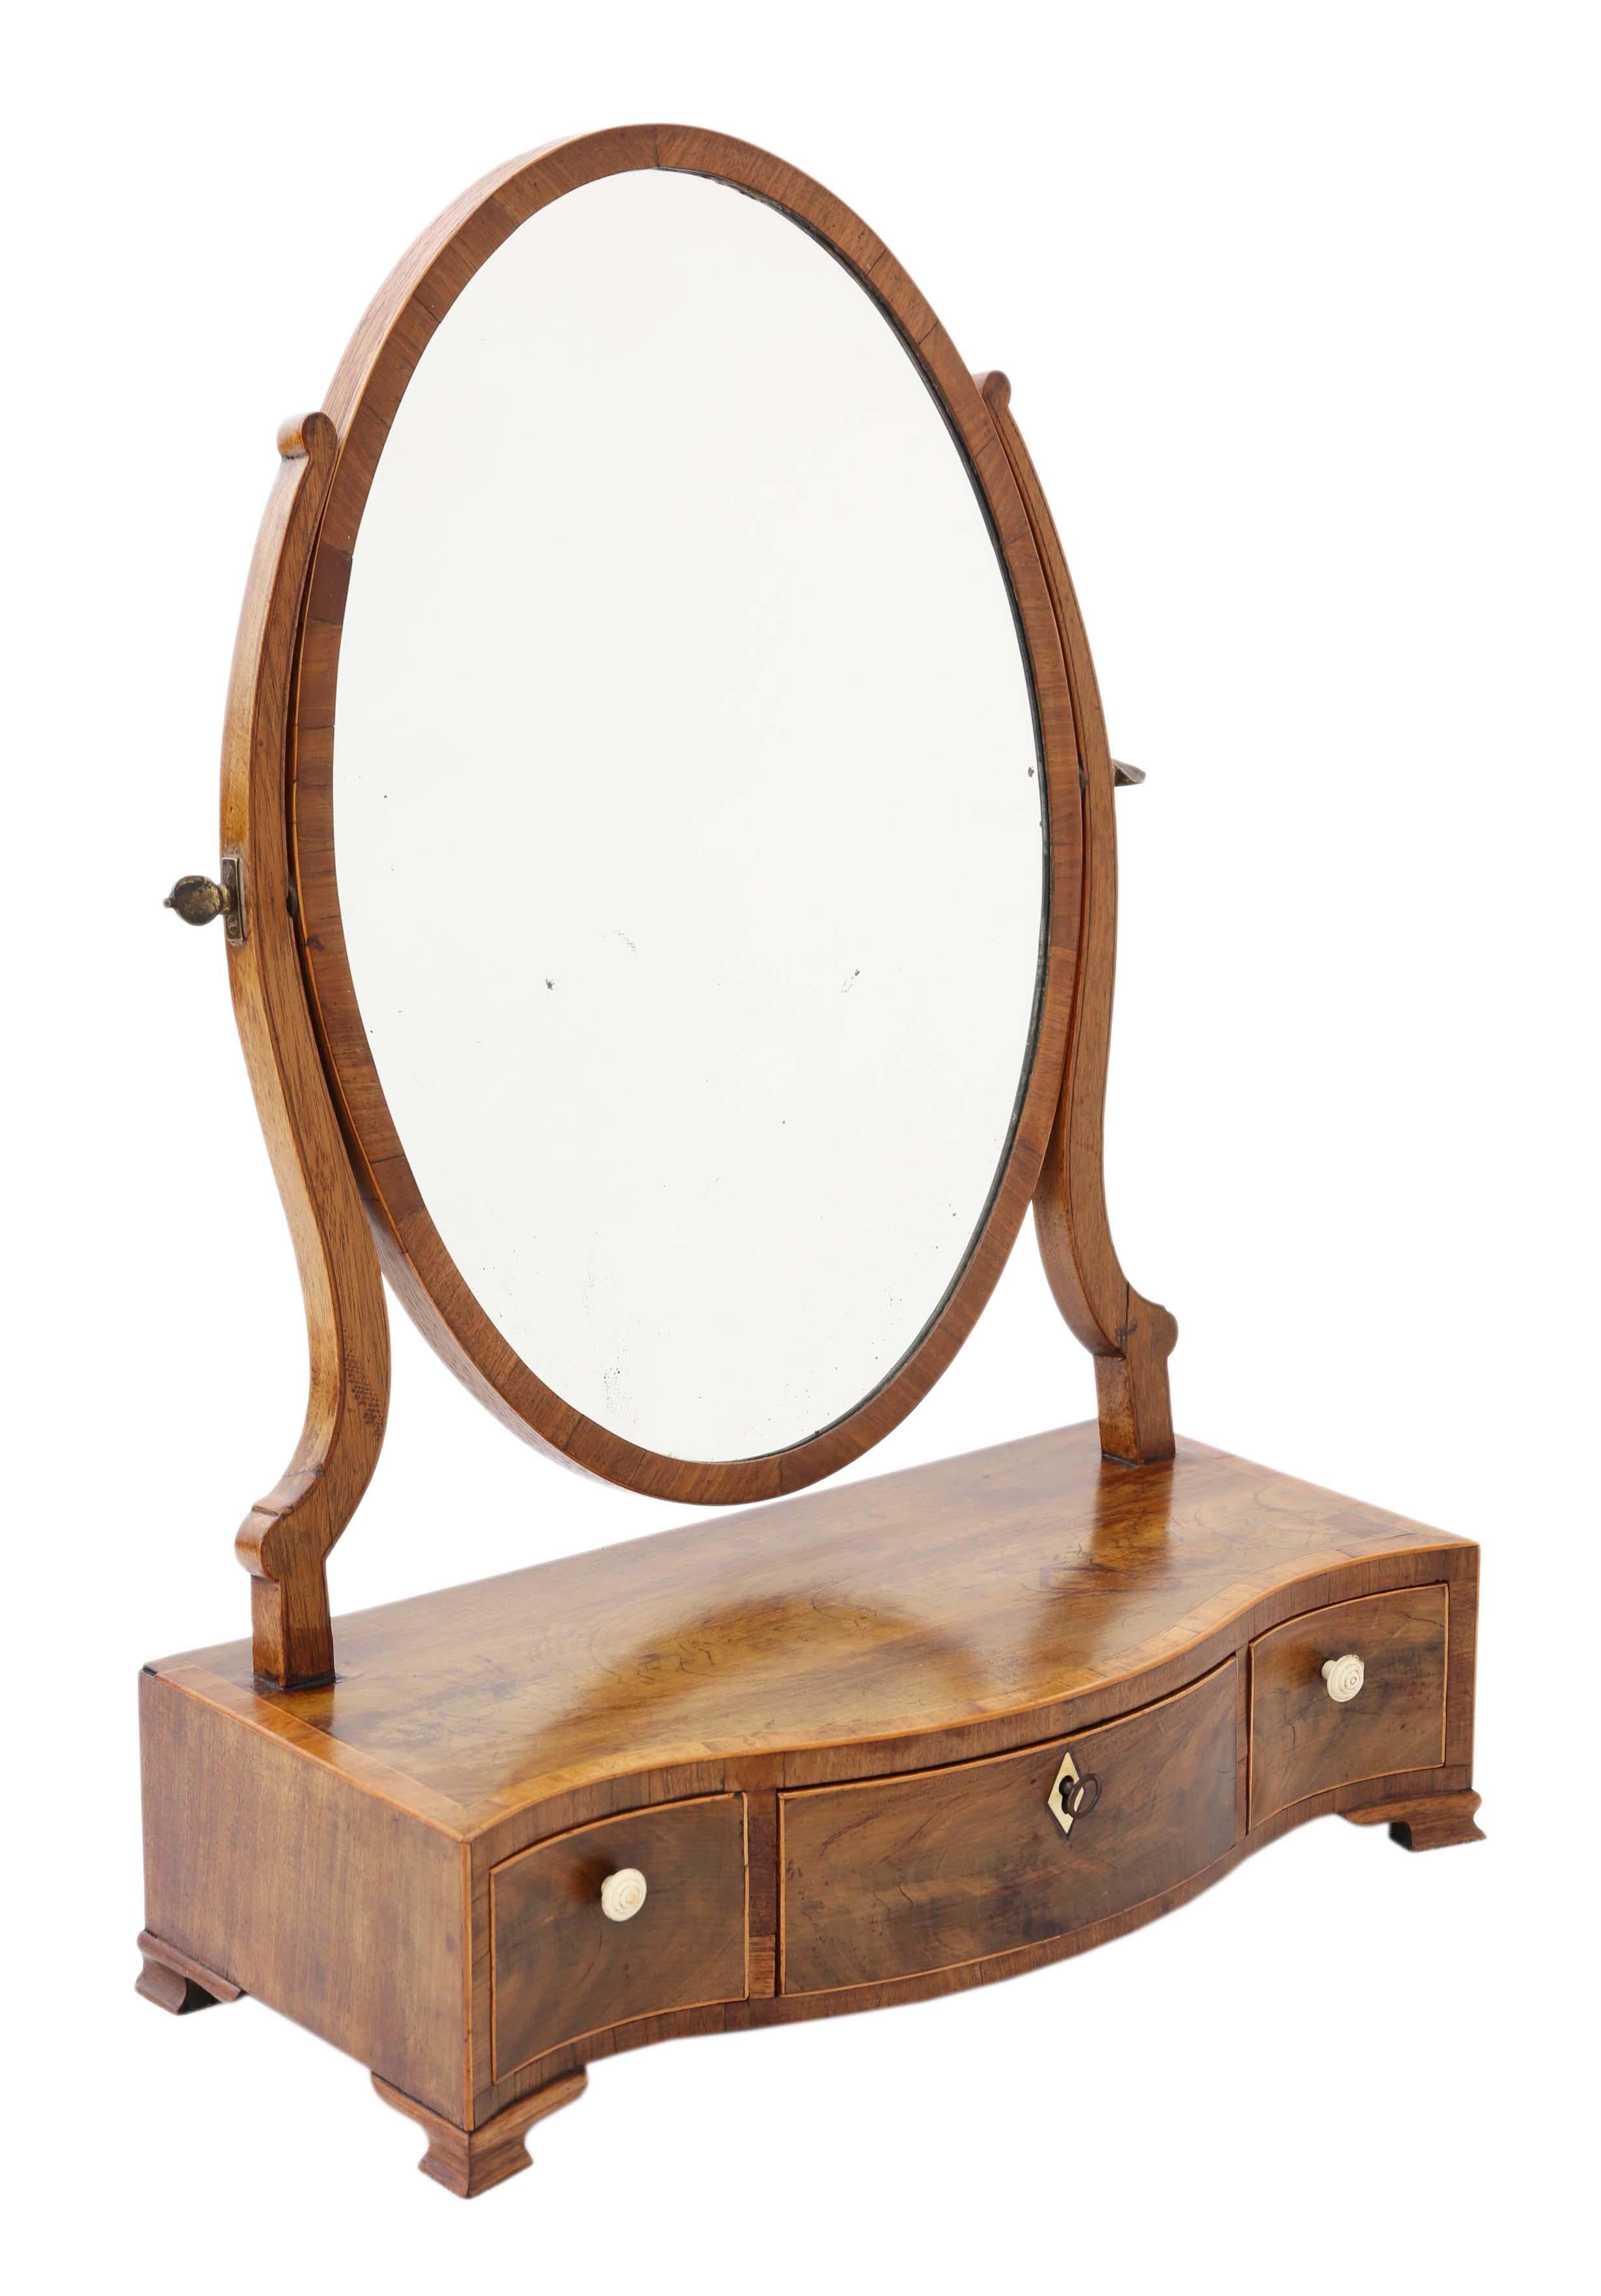 Antique quality Georgian serpentine inlaid mahogany dressing table swing mirror, circa 1800. Attractive crossbanding and line inlays.
This is a lovely mirror that is full of age and charm, with great proportions.
A rare find that would look